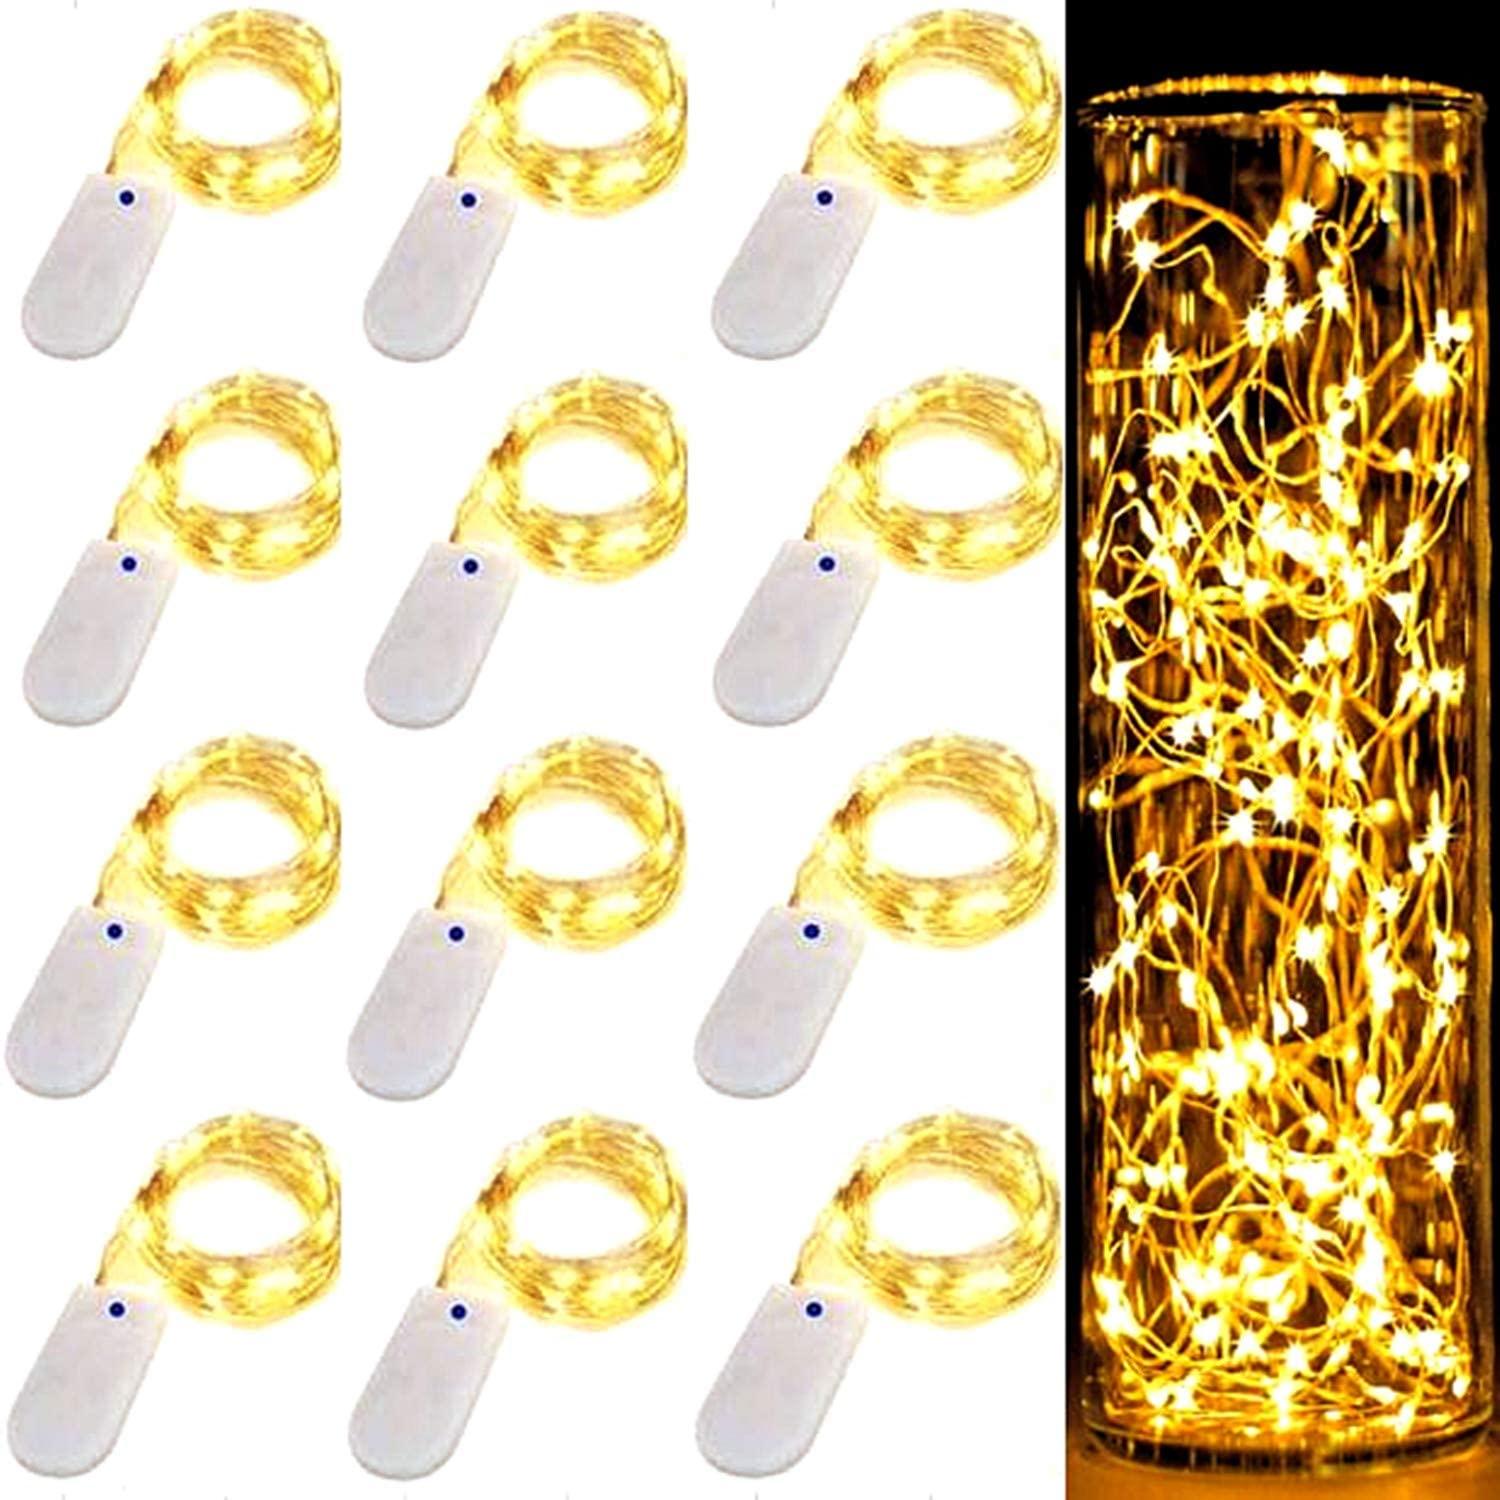 12 Packs LED Fairy Lights CR2032 Battery Operated String Wire Christmas Light,3.3Ft(1 Meters) 10 LED Firefly Starry Moon Lights for Birthday Wedding - Lasercutwraps Shop